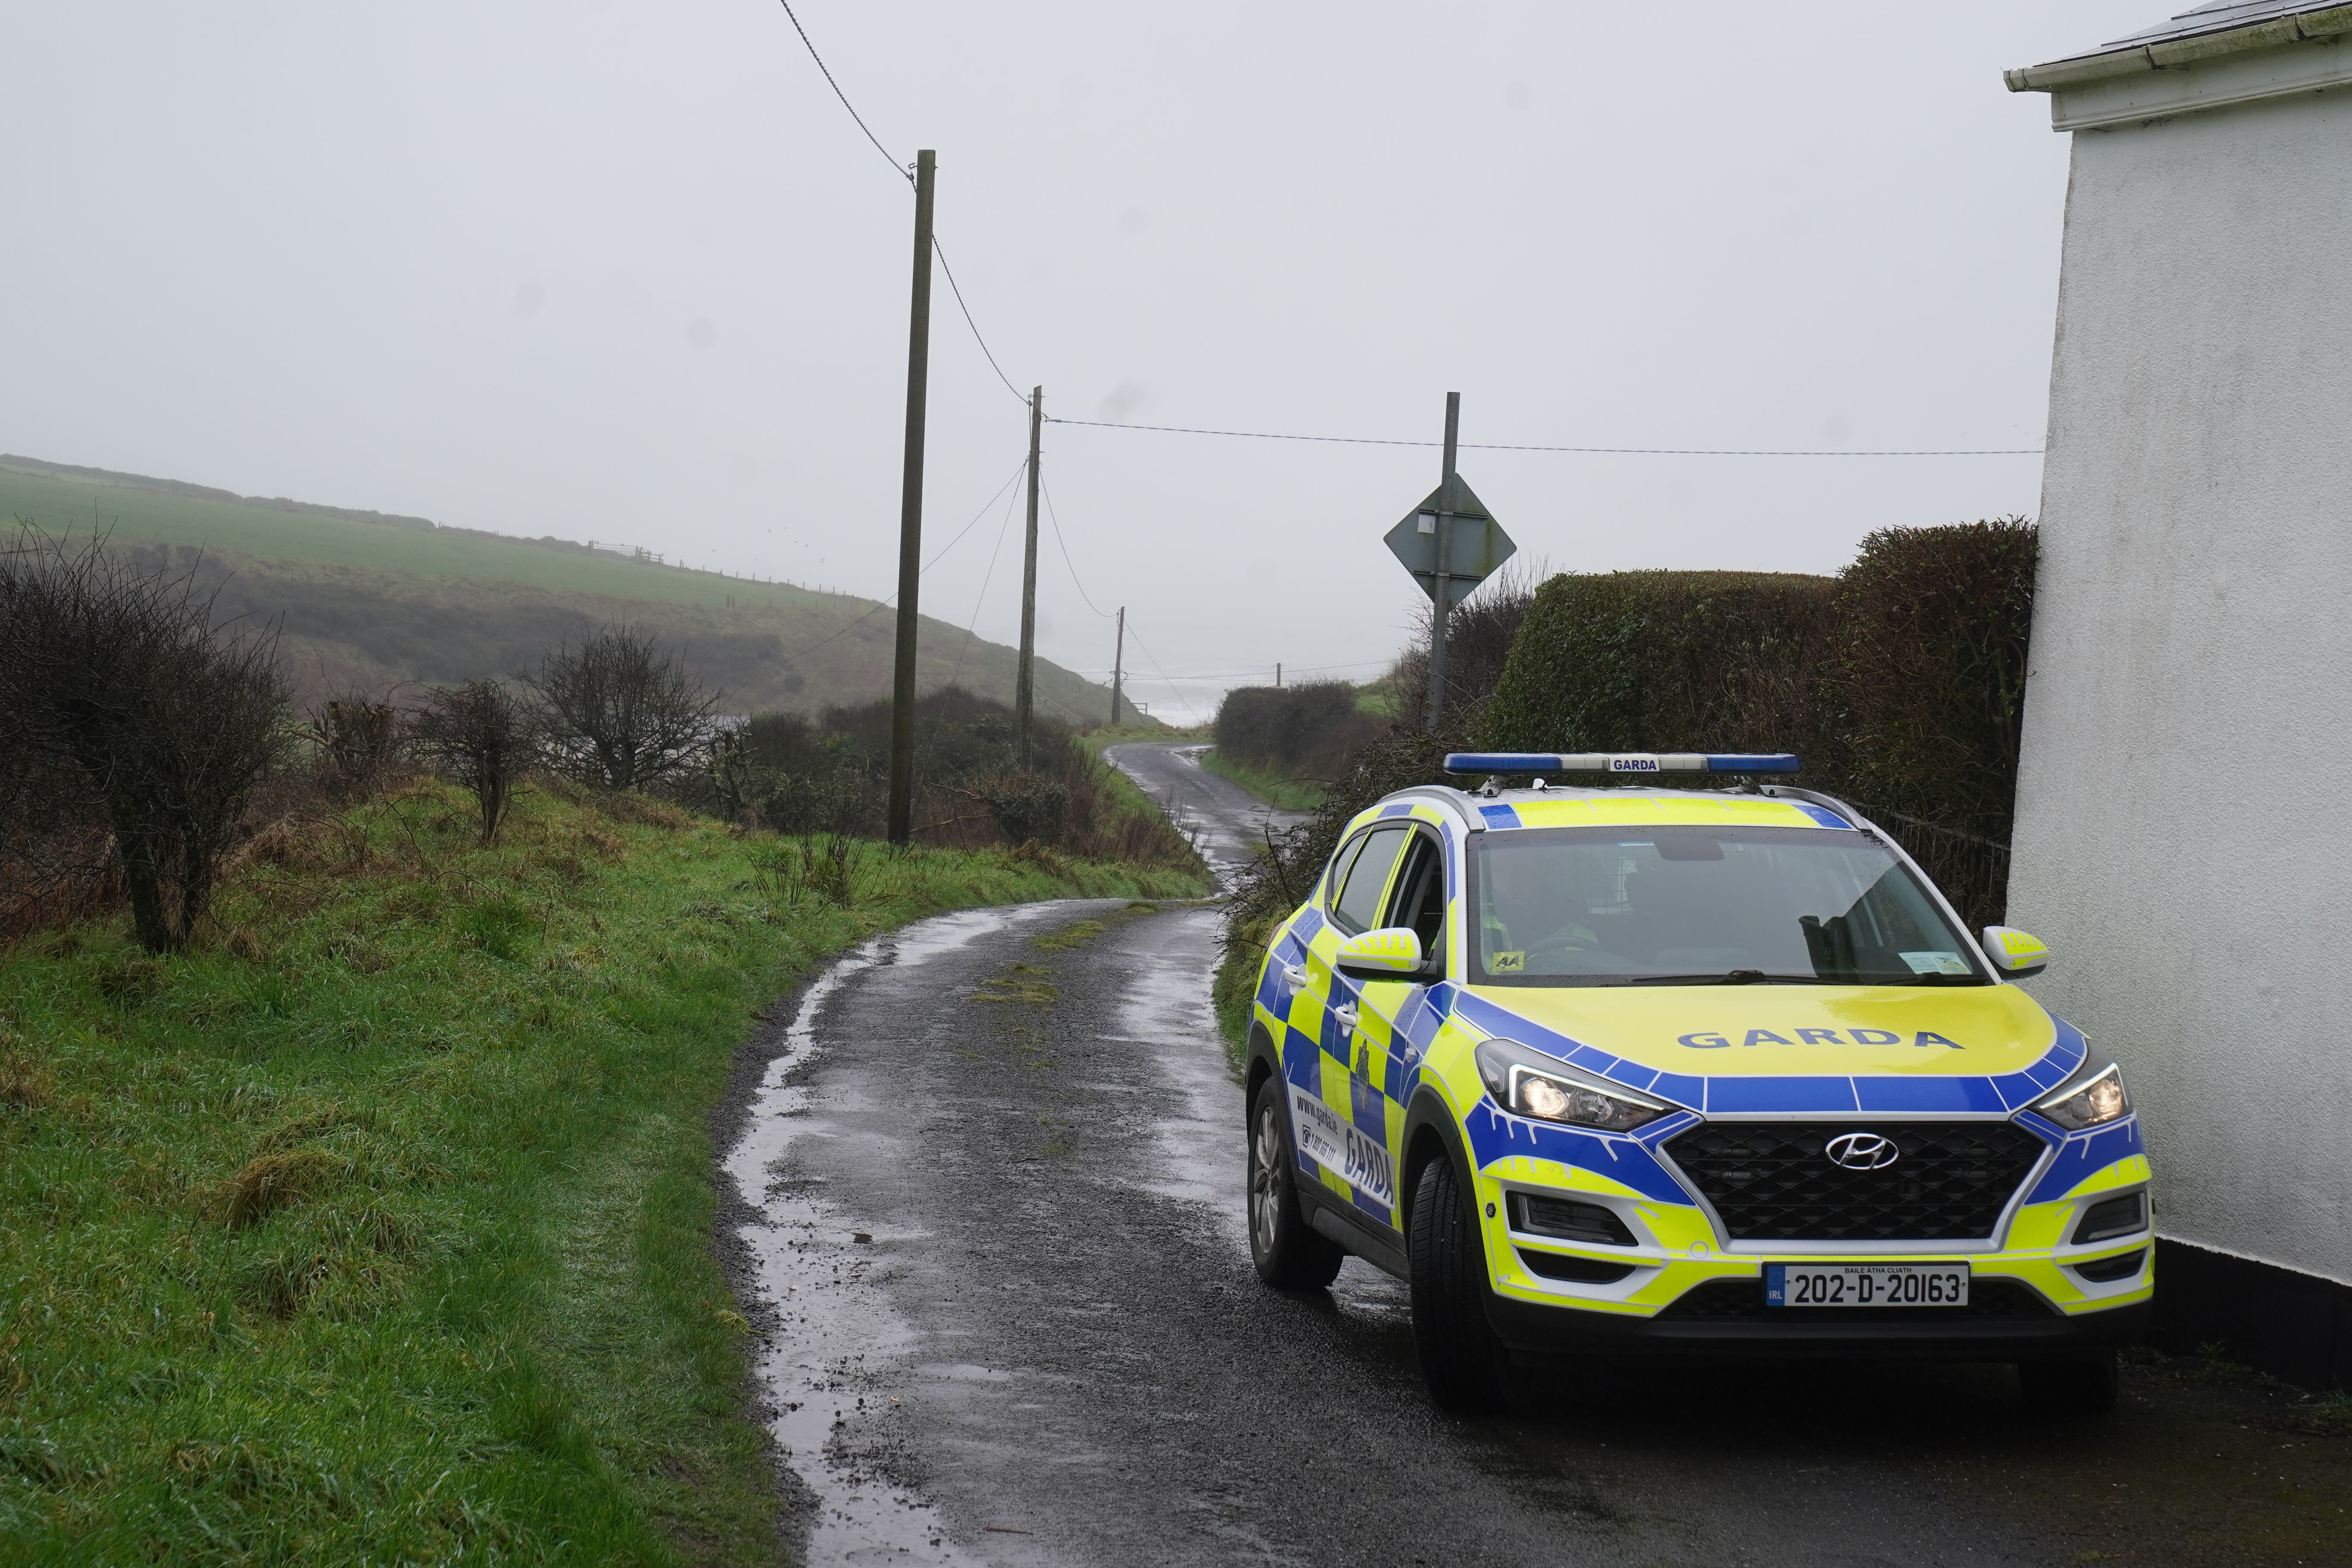 A garda car parked close to the scene in the Rathmoylan area of Dunmore East, Co Waterford (Brian Lawless/PA)